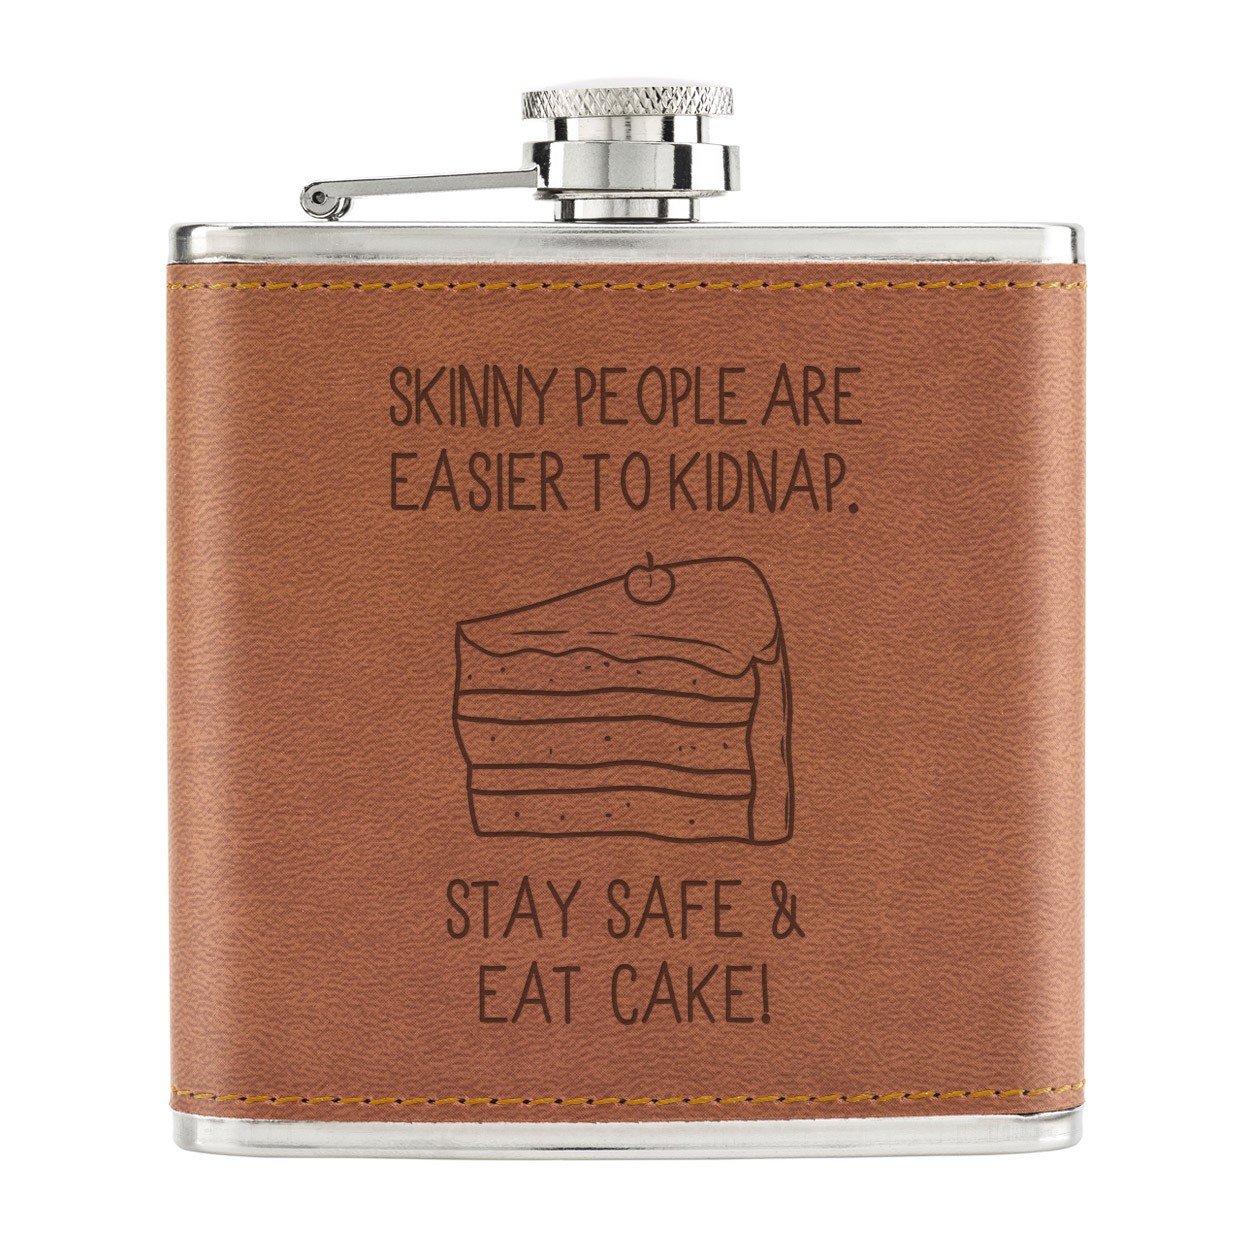 Skinny People Are Easier To Kidnap Stay Safe & Eat Cake 6oz PU Leather Hip Flask Tan